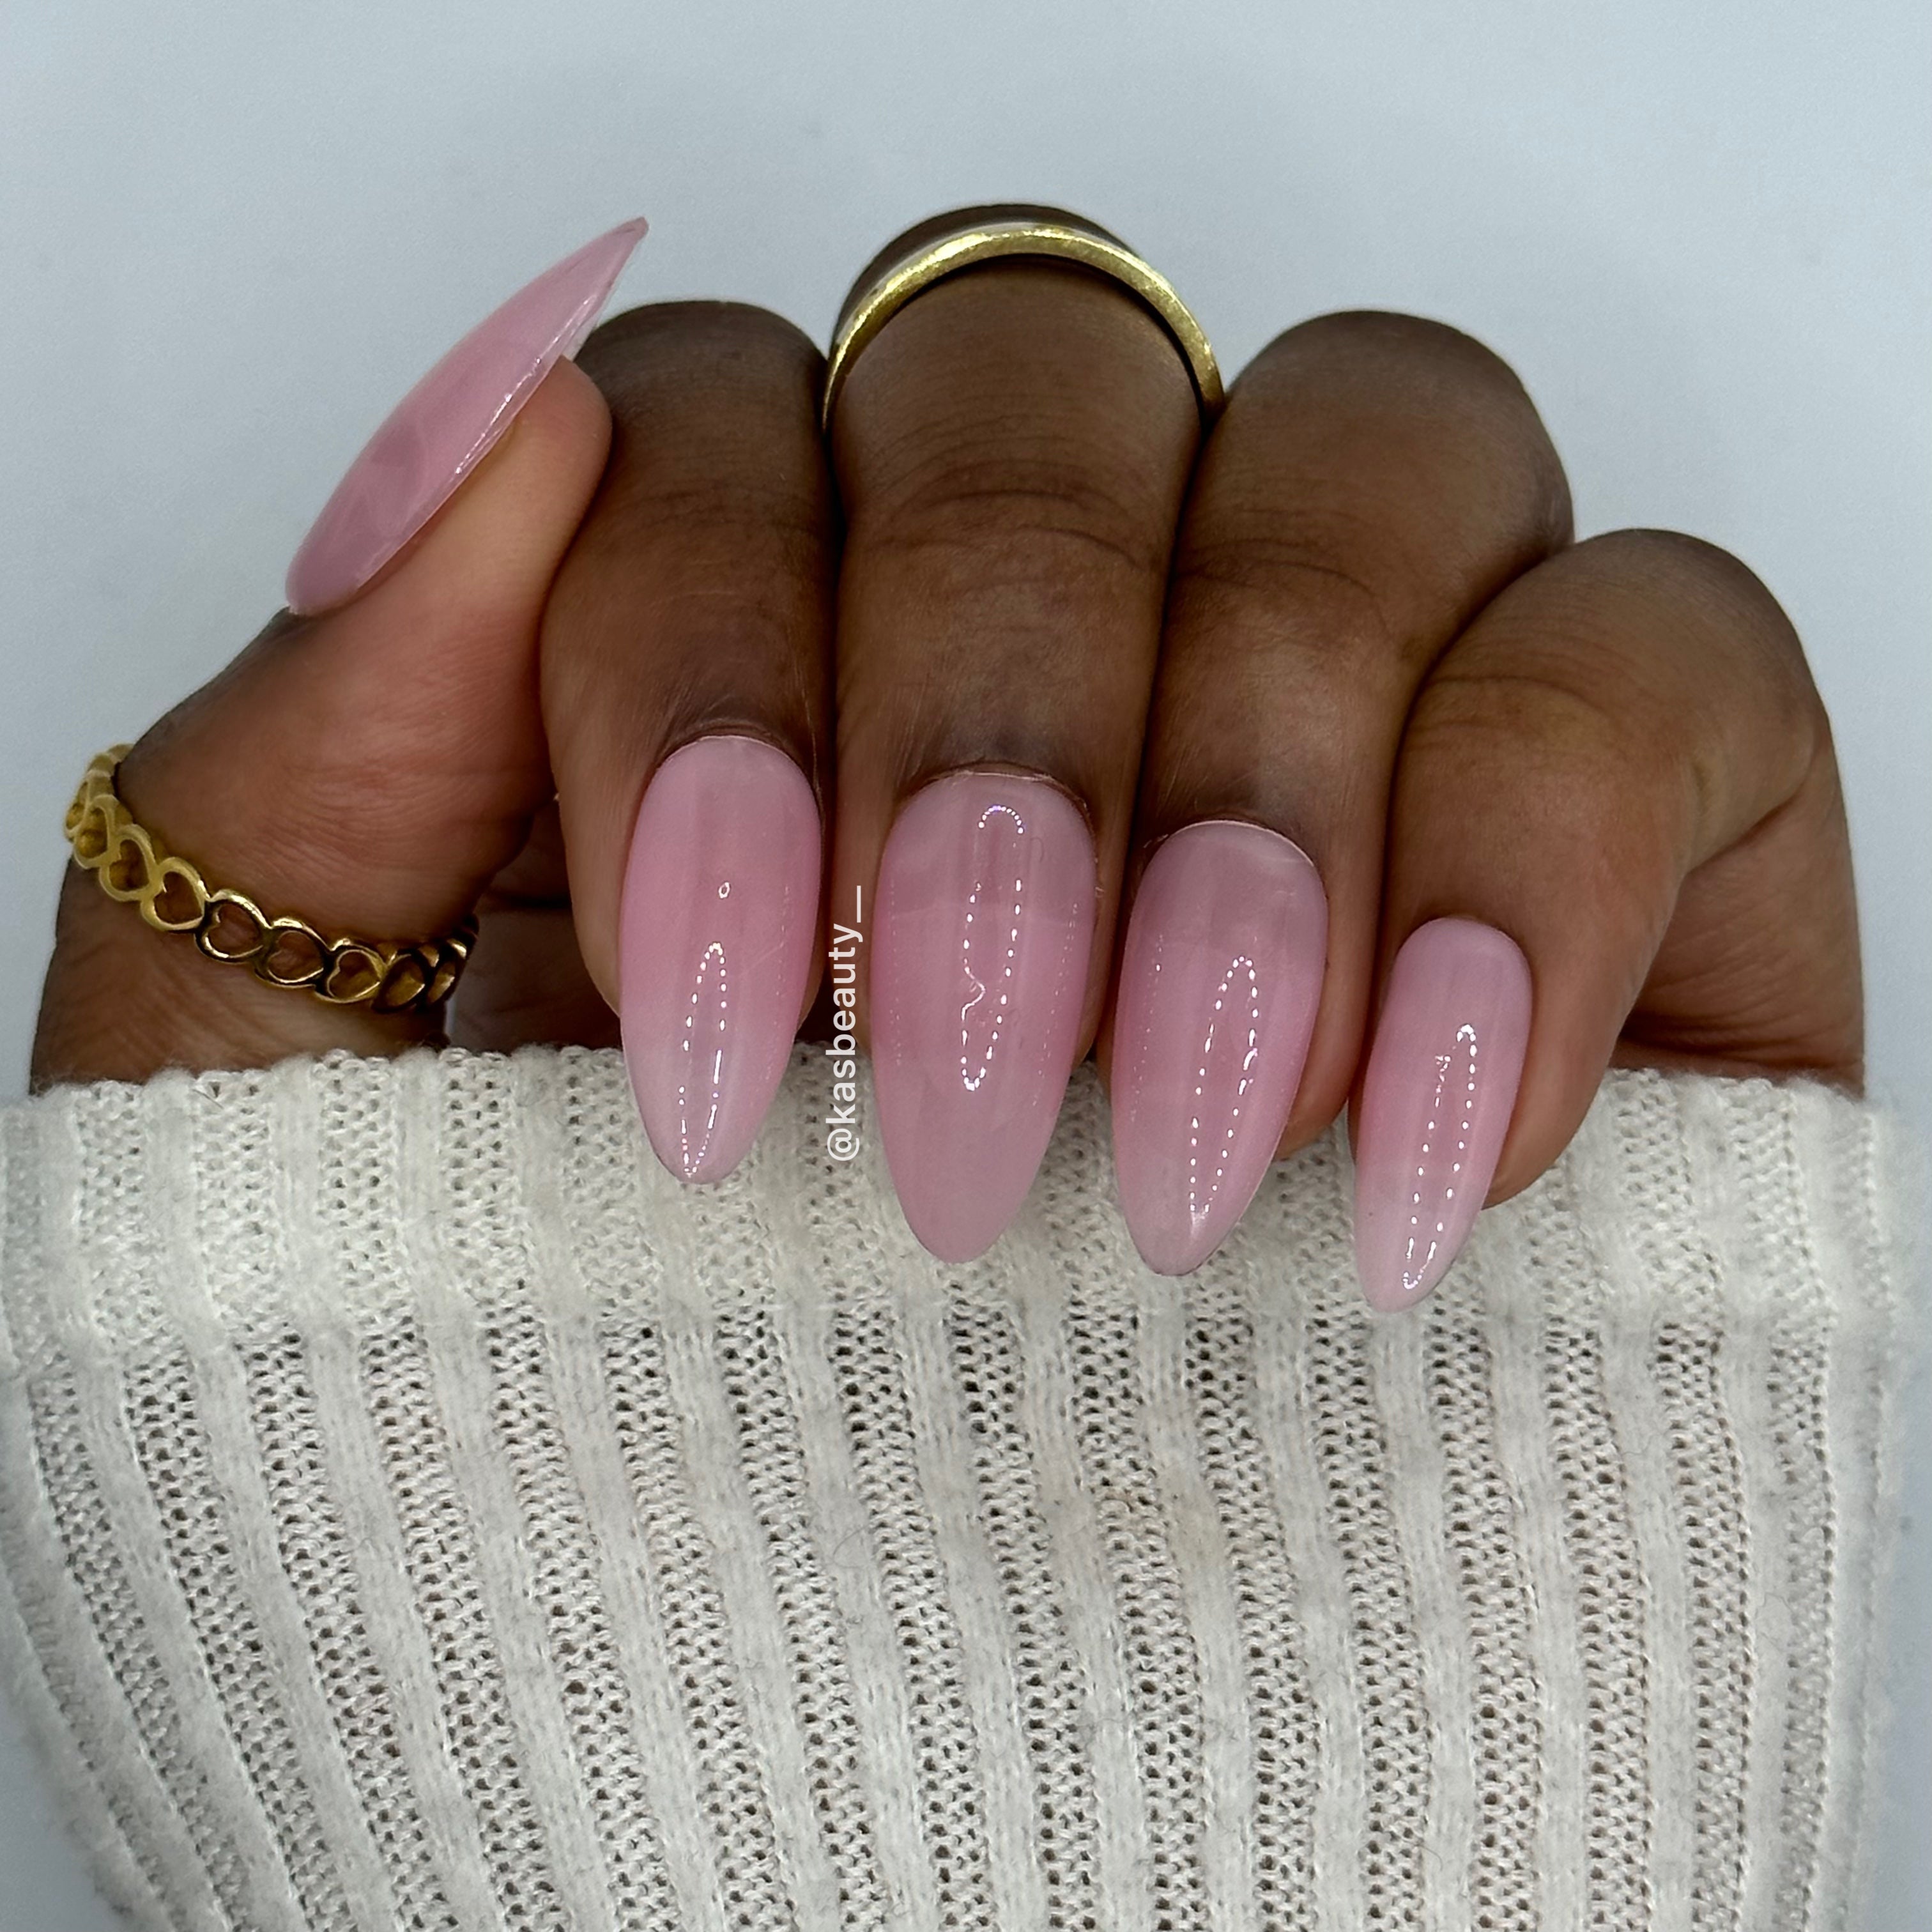 30+ Pink & White Nail Designs You'll Want to Copy - Days Inspired